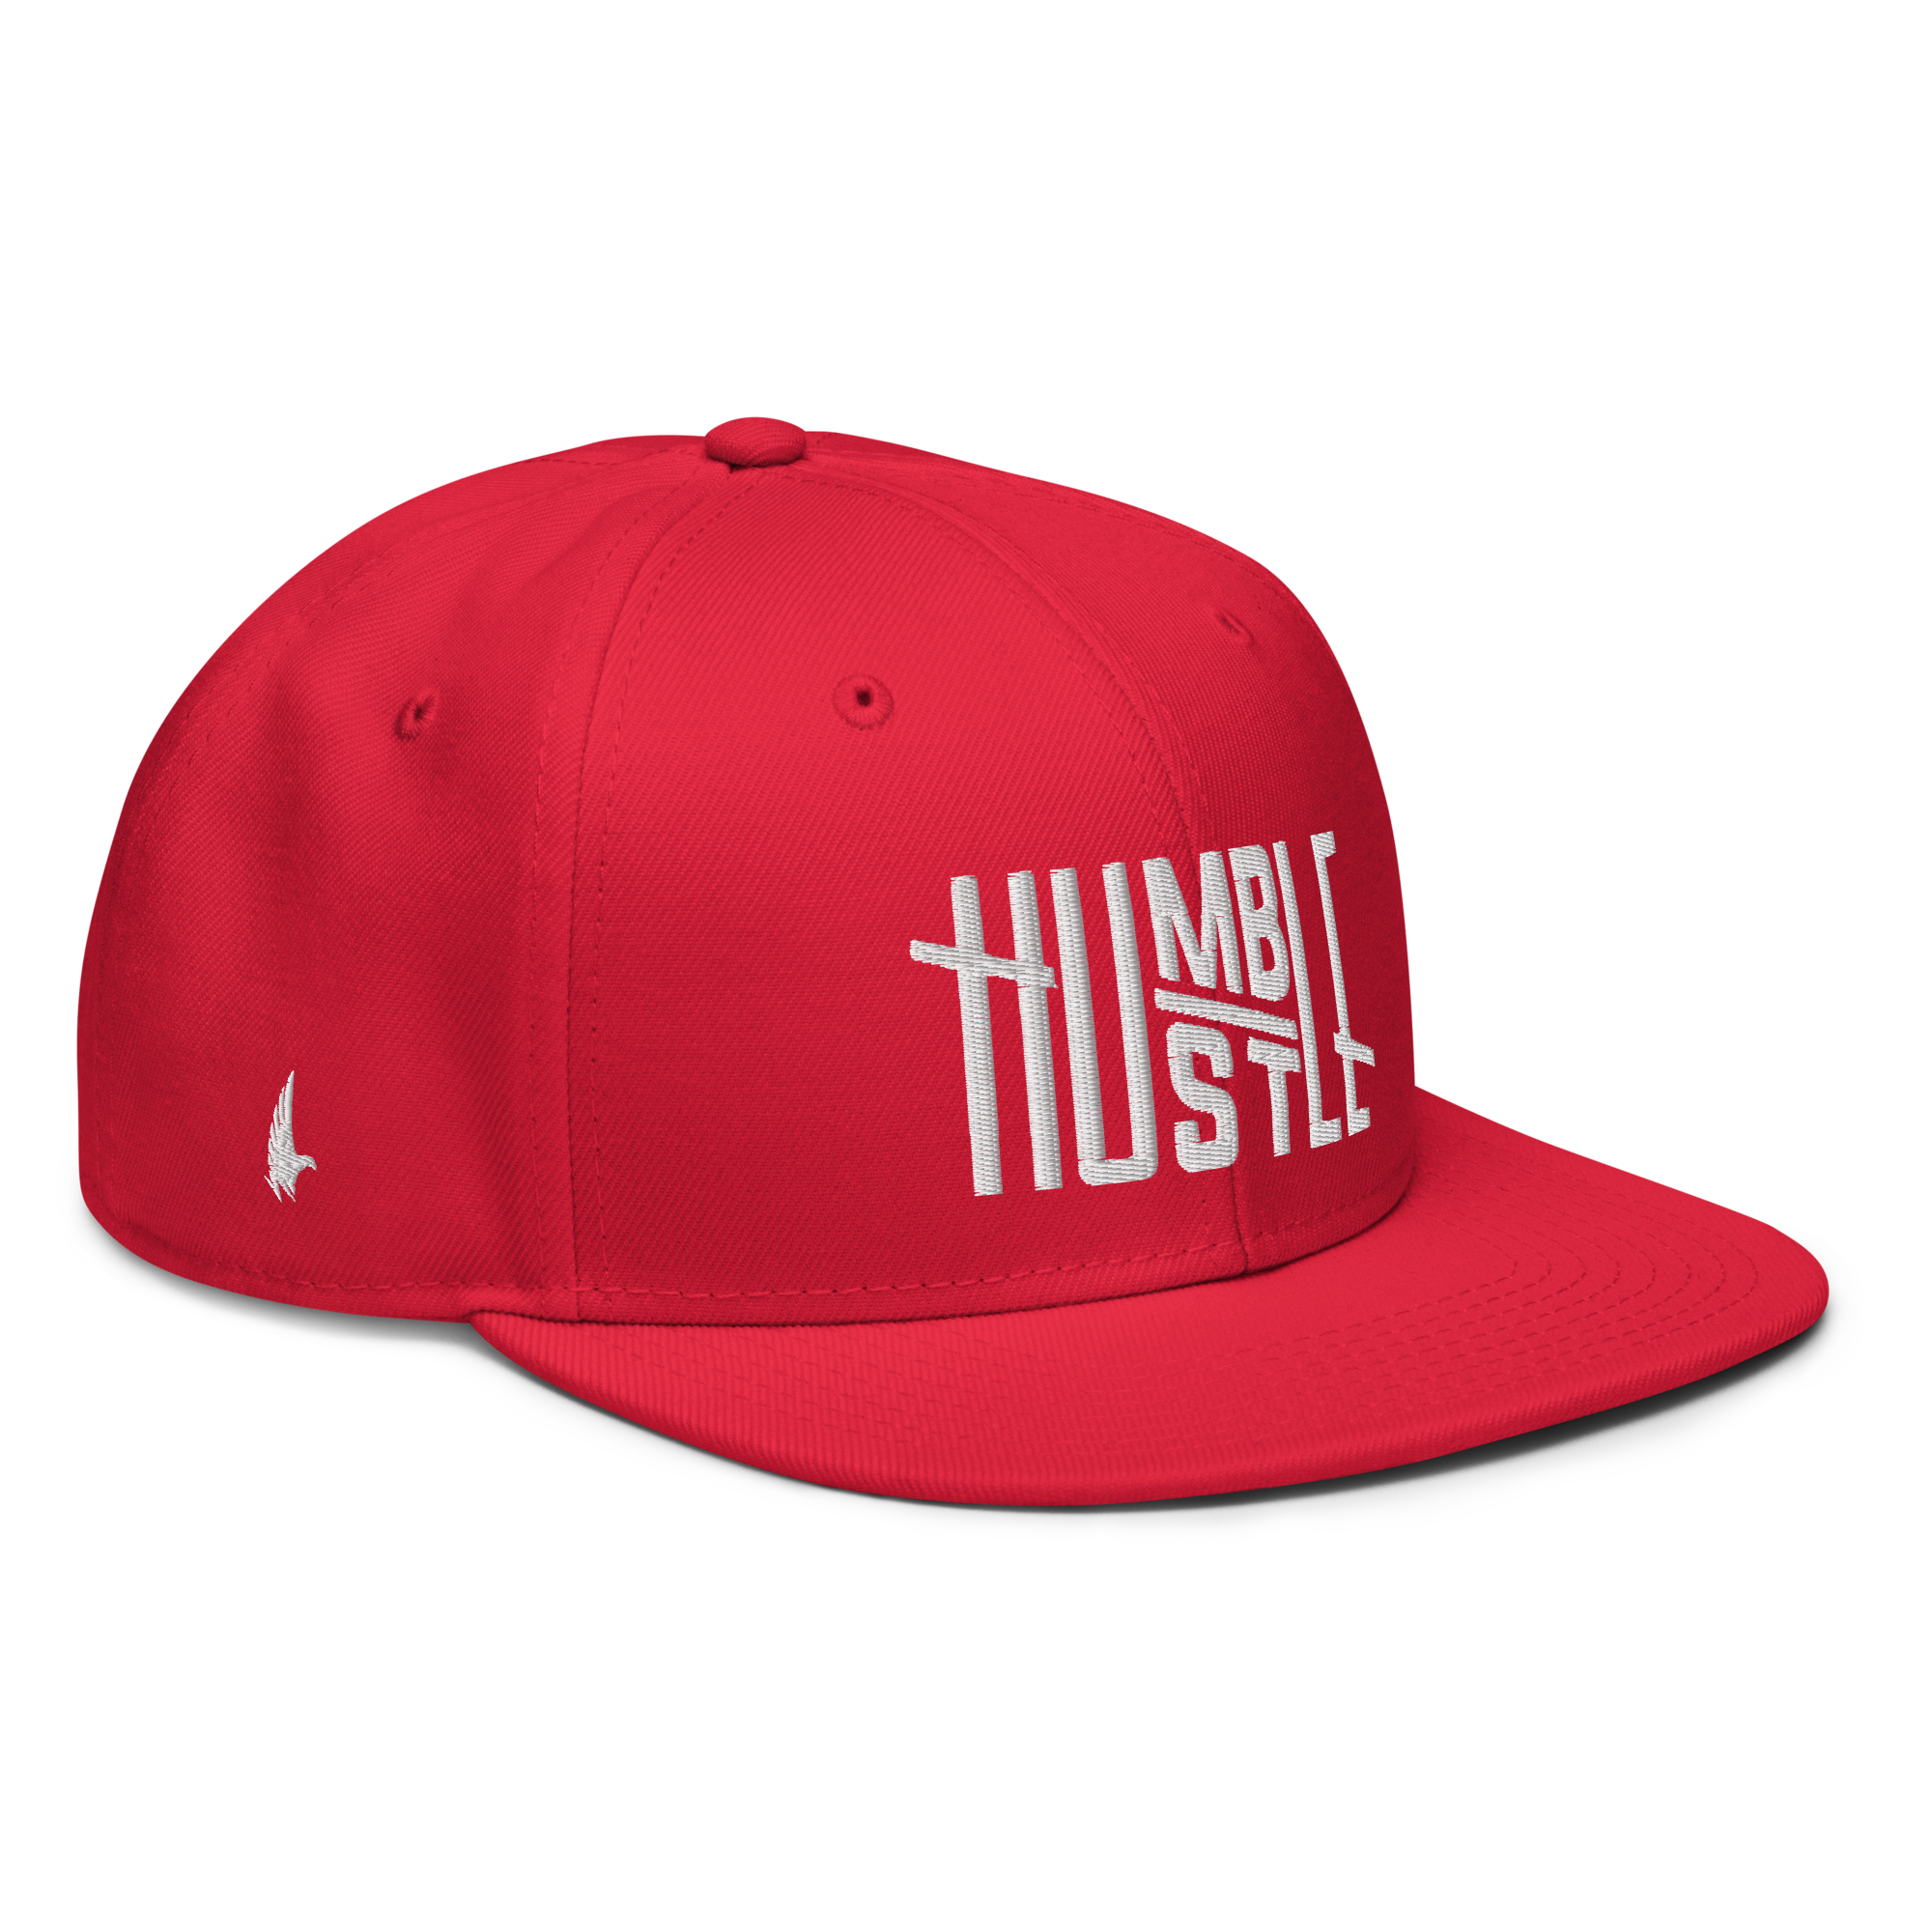 Humble Hustle Snapback Hat - Red/White OS - Loyalty Vibes